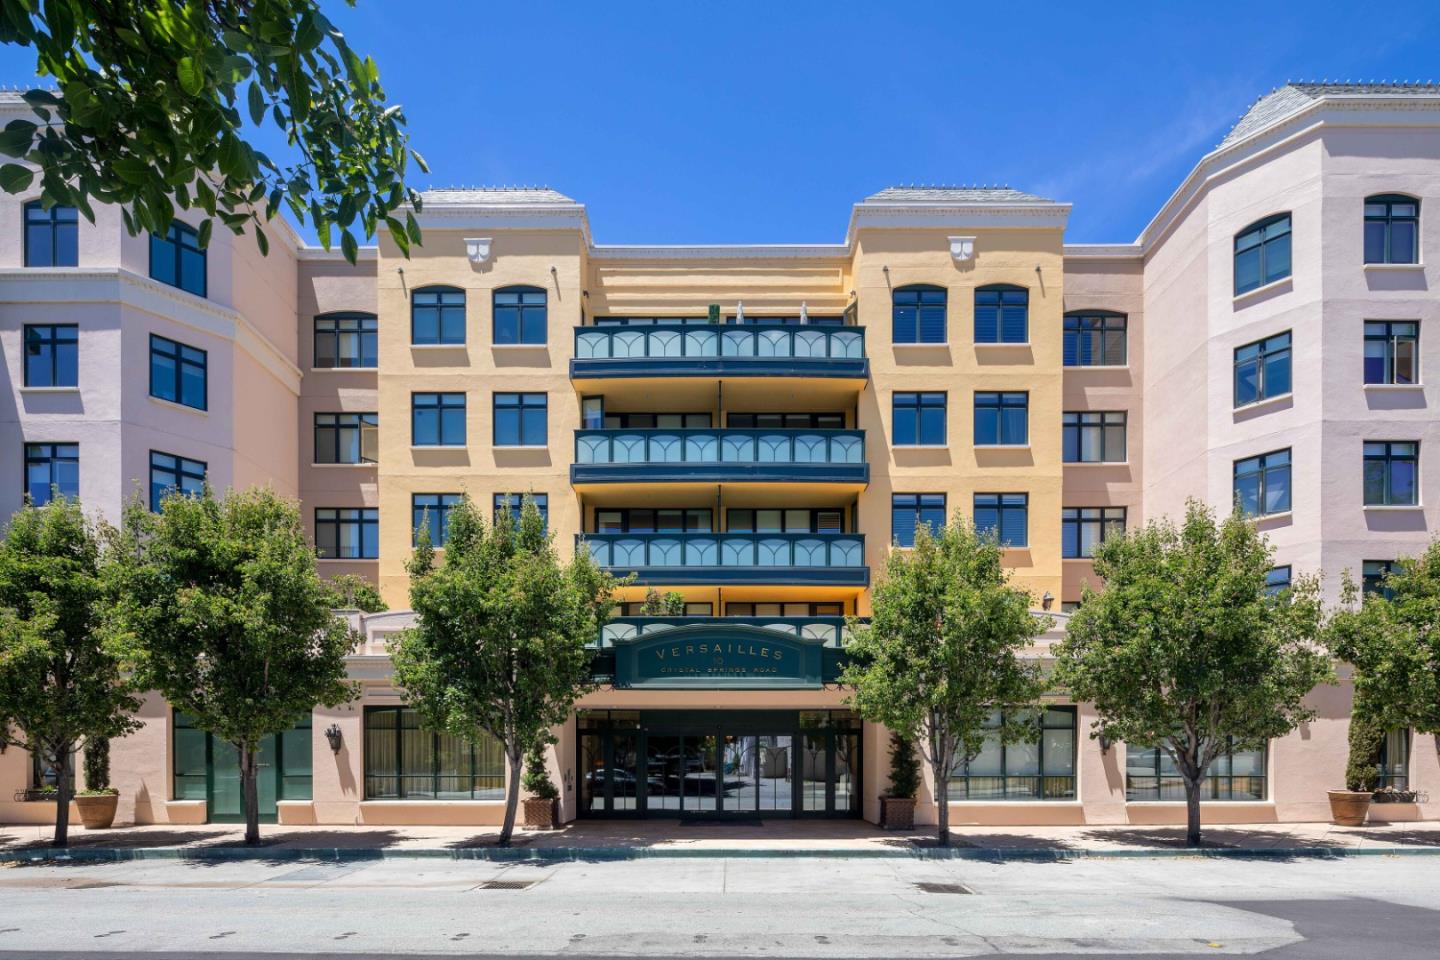 Condos, Lofts and Townhomes for Sale in Active Adult 55+ Condos in the San Jose Area